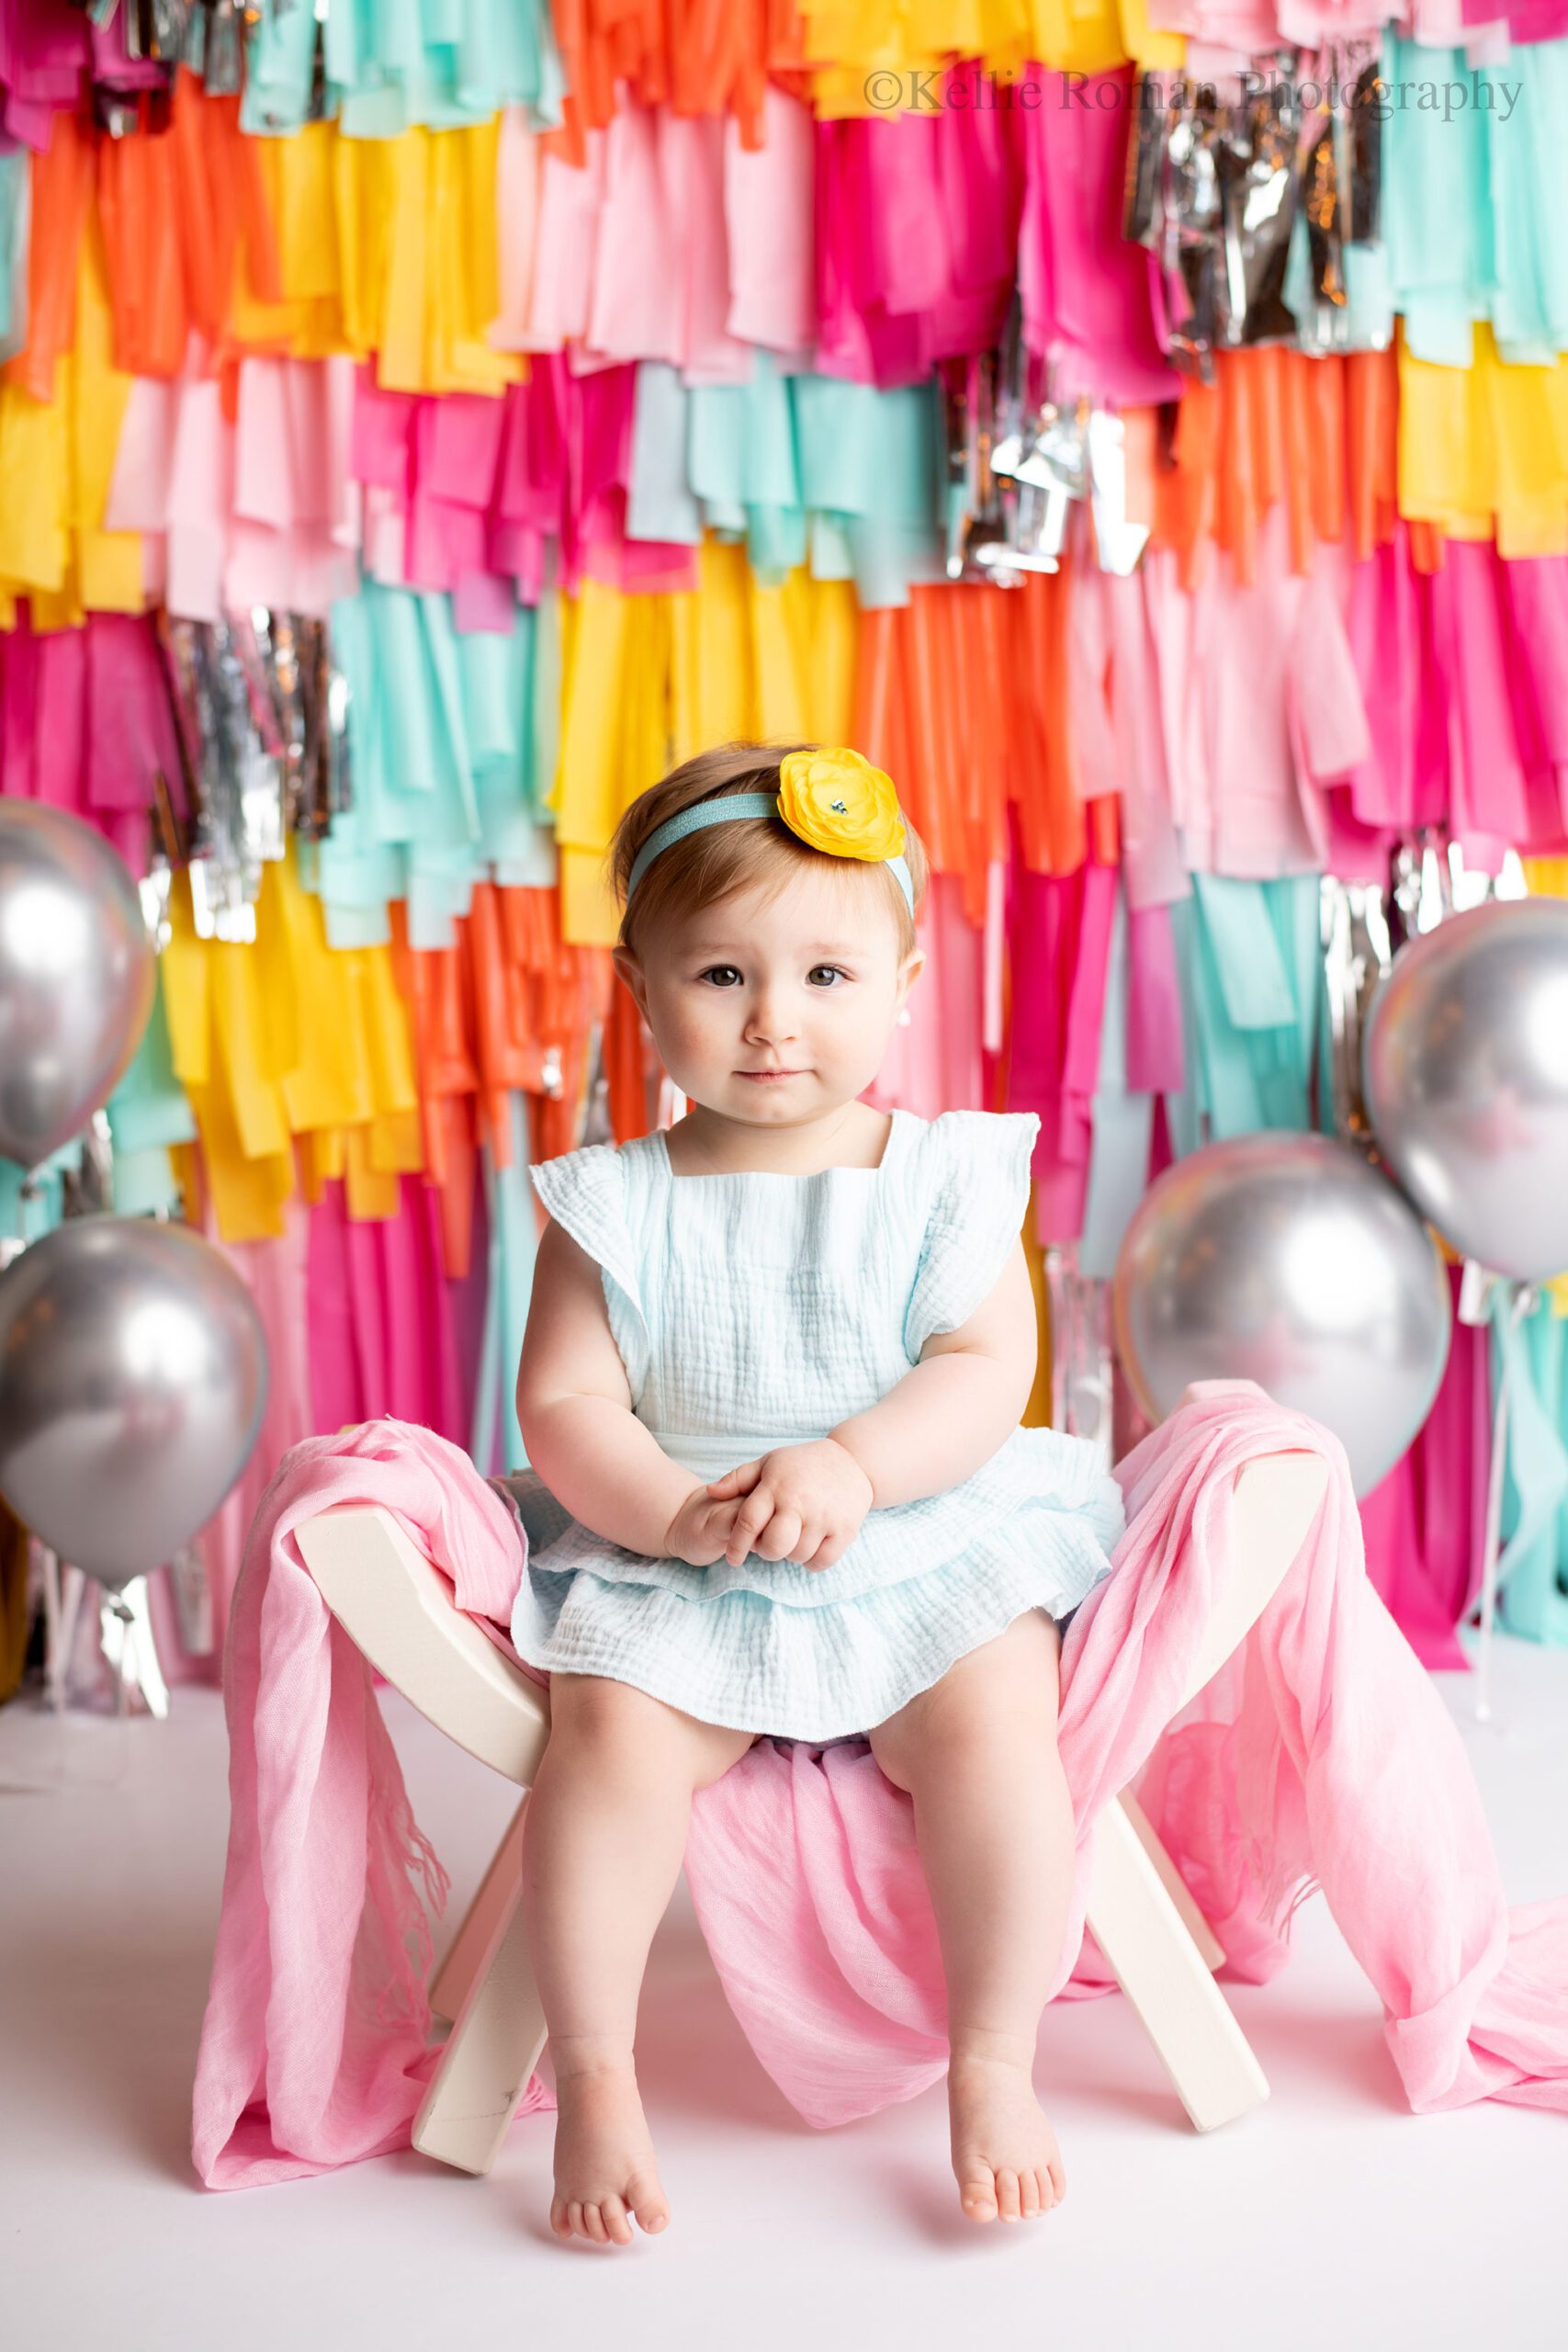 one year old girl with a blue romper on is sitting on white bench covered in a light pink fabric. girl is holding her hands and looking at the camera. she has a yellow and teal flower headband on. the backdrop is fun and brightly colored with teal yellow orange pink and silver fringe strands. there are silver balloons blown up as well
